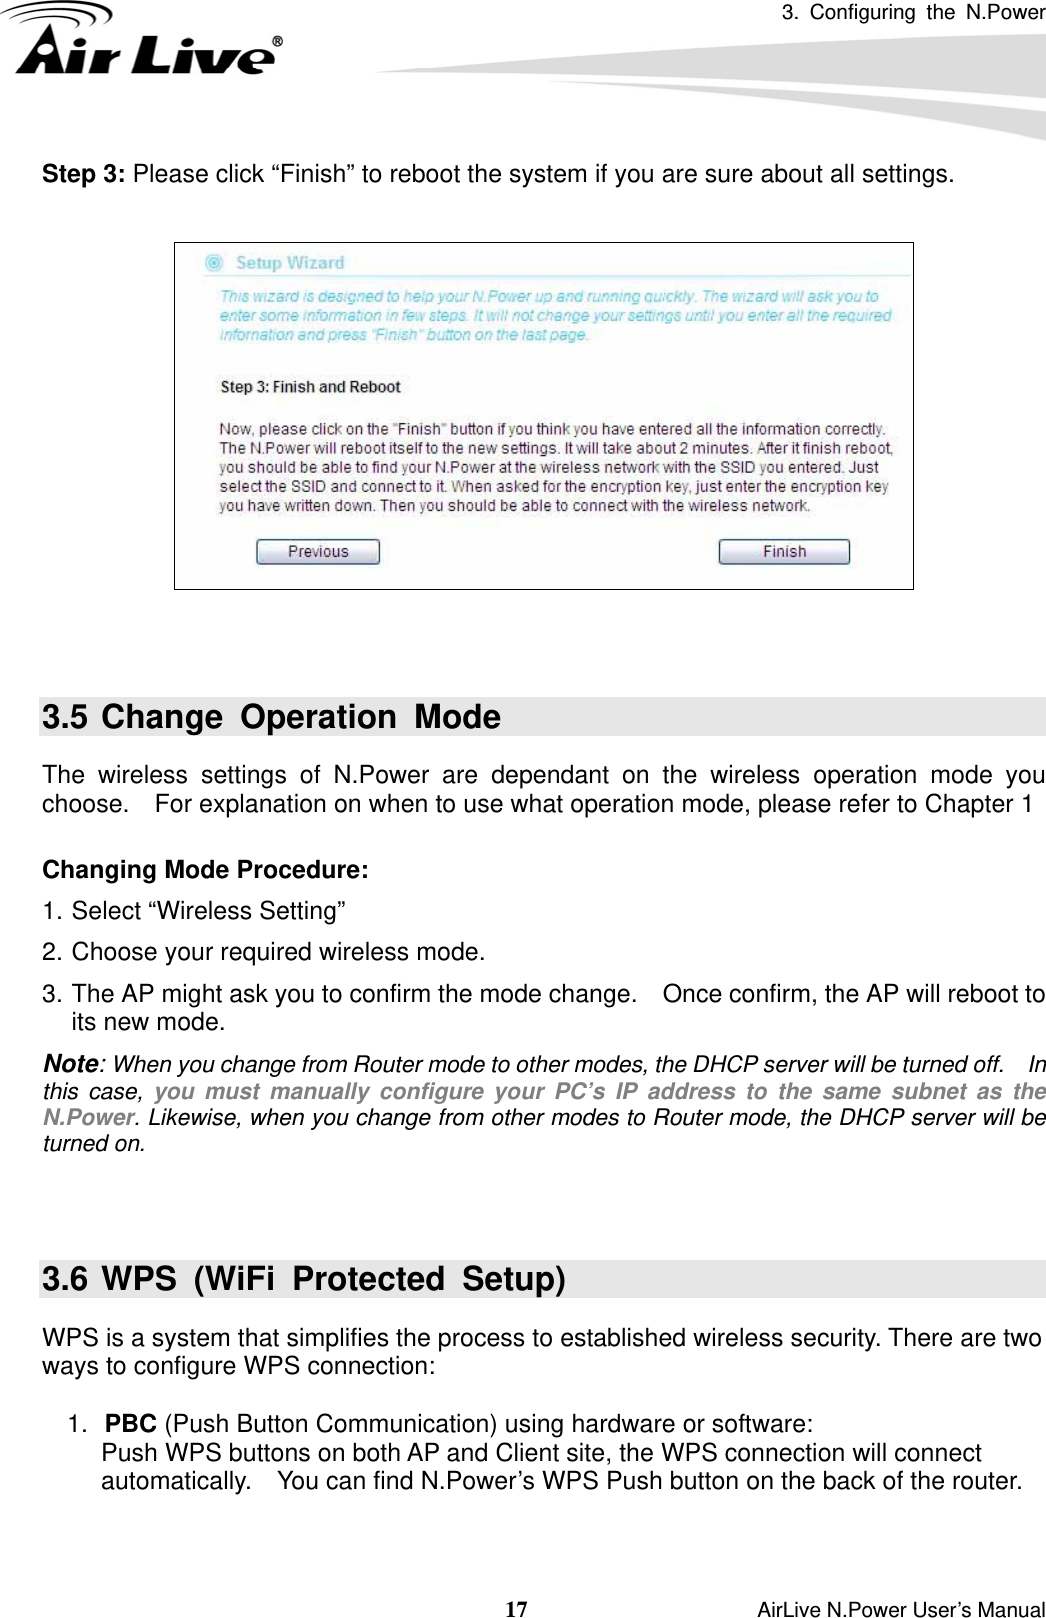 3. Configuring the N.Power  17                    AirLive N.Power User’s Manual Step 3: Please click “Finish” to reboot the system if you are sure about all settings.     3.5 Change Operation Mode The wireless settings of N.Power are dependant on the wireless operation mode you choose.    For explanation on when to use what operation mode, please refer to Chapter 1  Changing Mode Procedure: 1. Select “Wireless Setting”   2. Choose your required wireless mode. 3. The AP might ask you to confirm the mode change.    Once confirm, the AP will reboot to its new mode. Note: When you change from Router mode to other modes, the DHCP server will be turned off.    In this case, you must manually configure your PC’s IP address to the same subnet as the N.Power. Likewise, when you change from other modes to Router mode, the DHCP server will be turned on.   3.6 WPS (WiFi Protected Setup) WPS is a system that simplifies the process to established wireless security. There are two ways to configure WPS connection:    1.  PBC (Push Button Communication) using hardware or software: Push WPS buttons on both AP and Client site, the WPS connection will connect automatically.    You can find N.Power’s WPS Push button on the back of the router.   